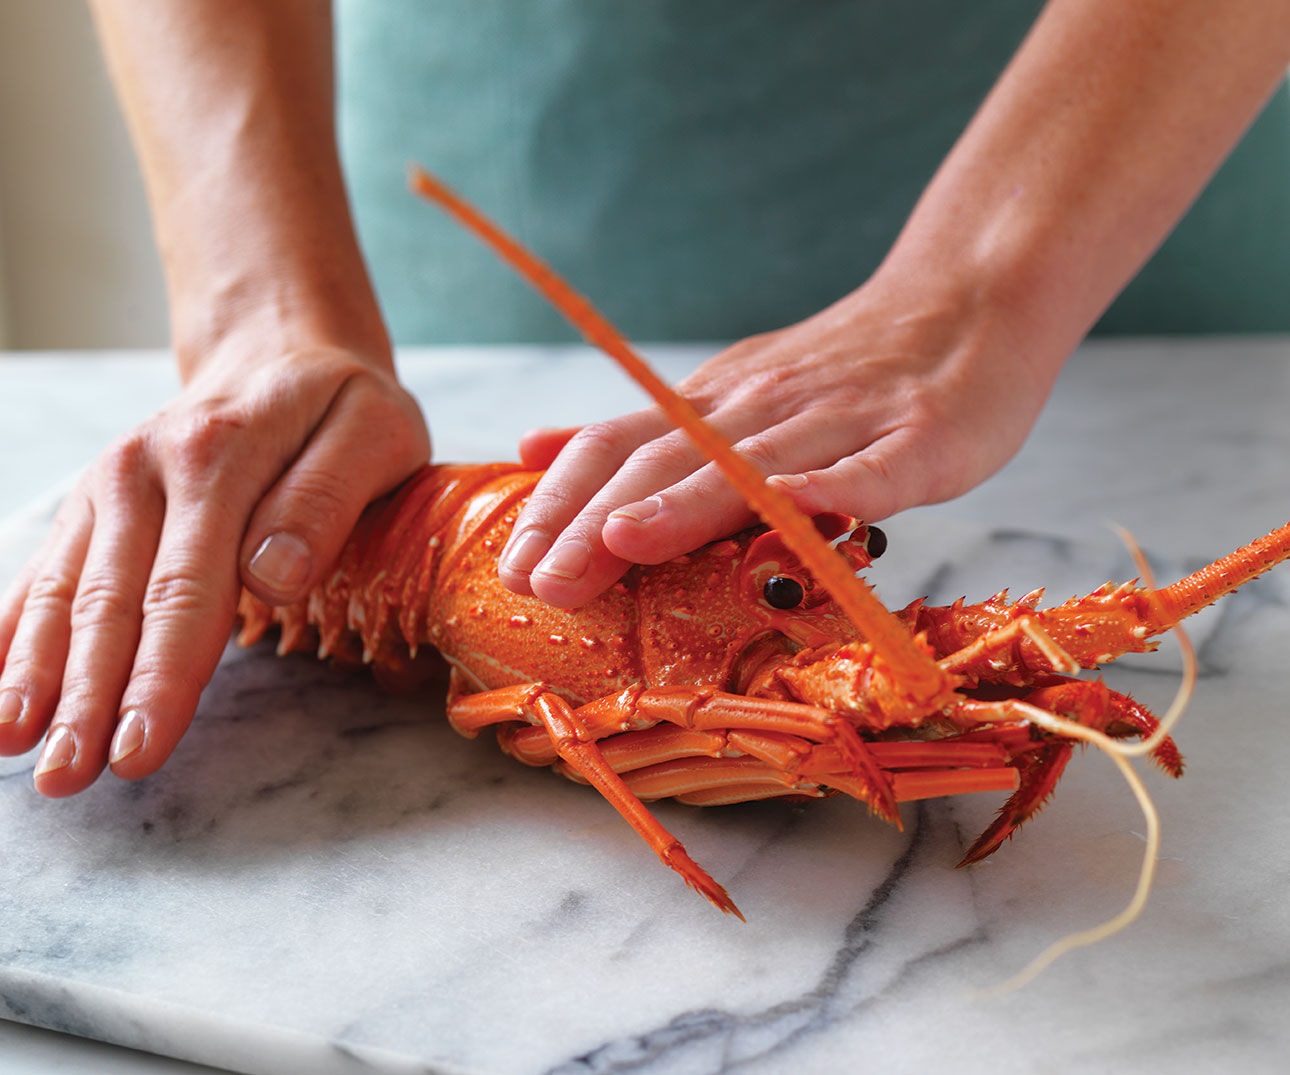 How To Halve And Clean A Cooked Lobster